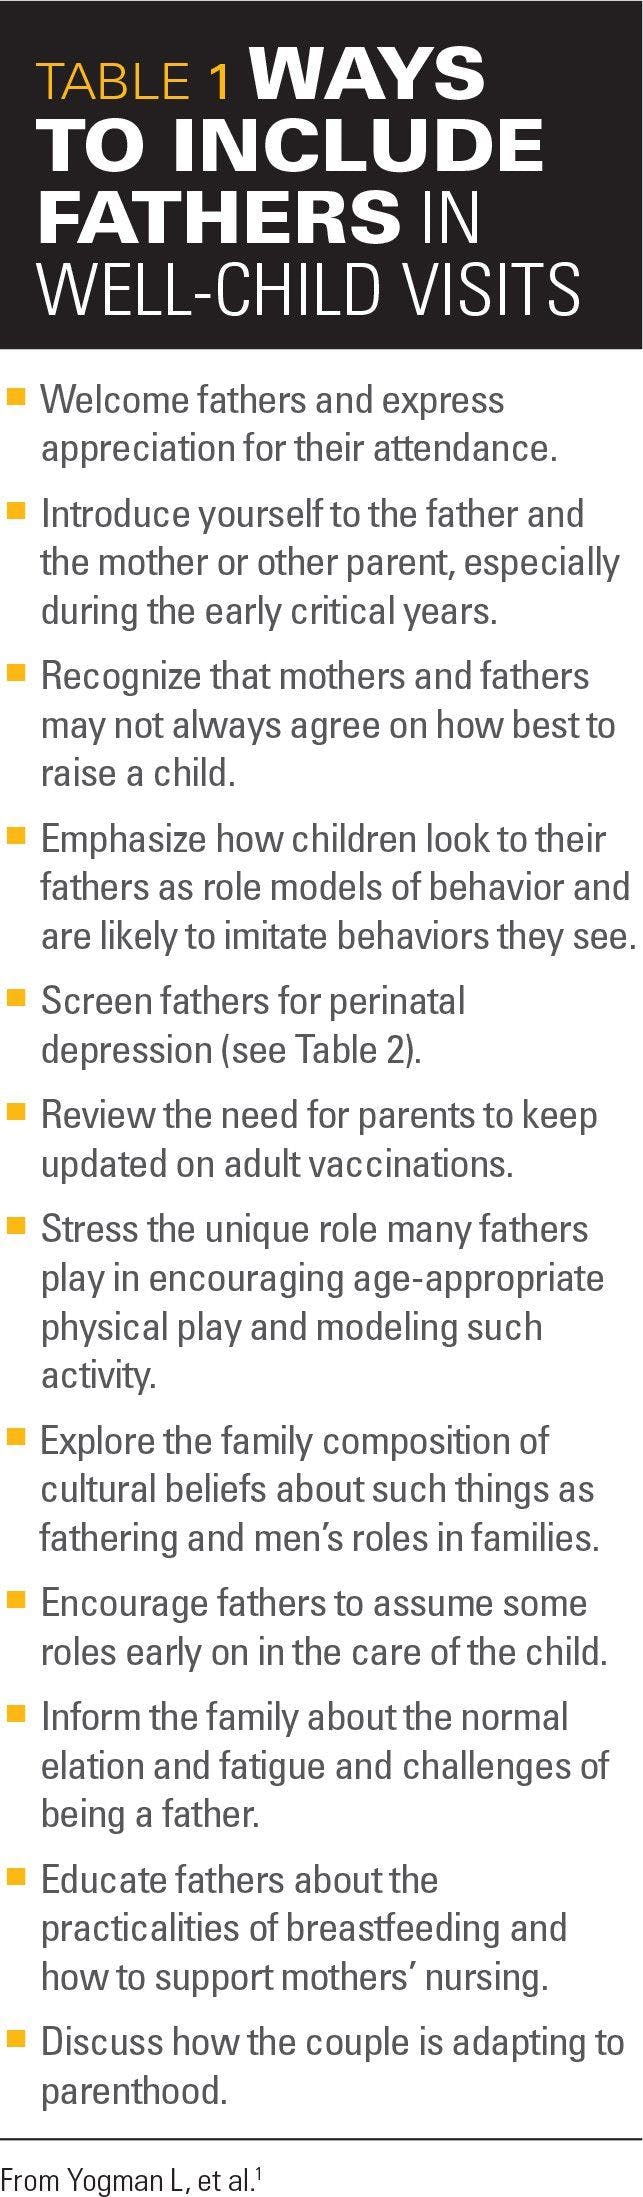 Ways to include fathers in well-child visits